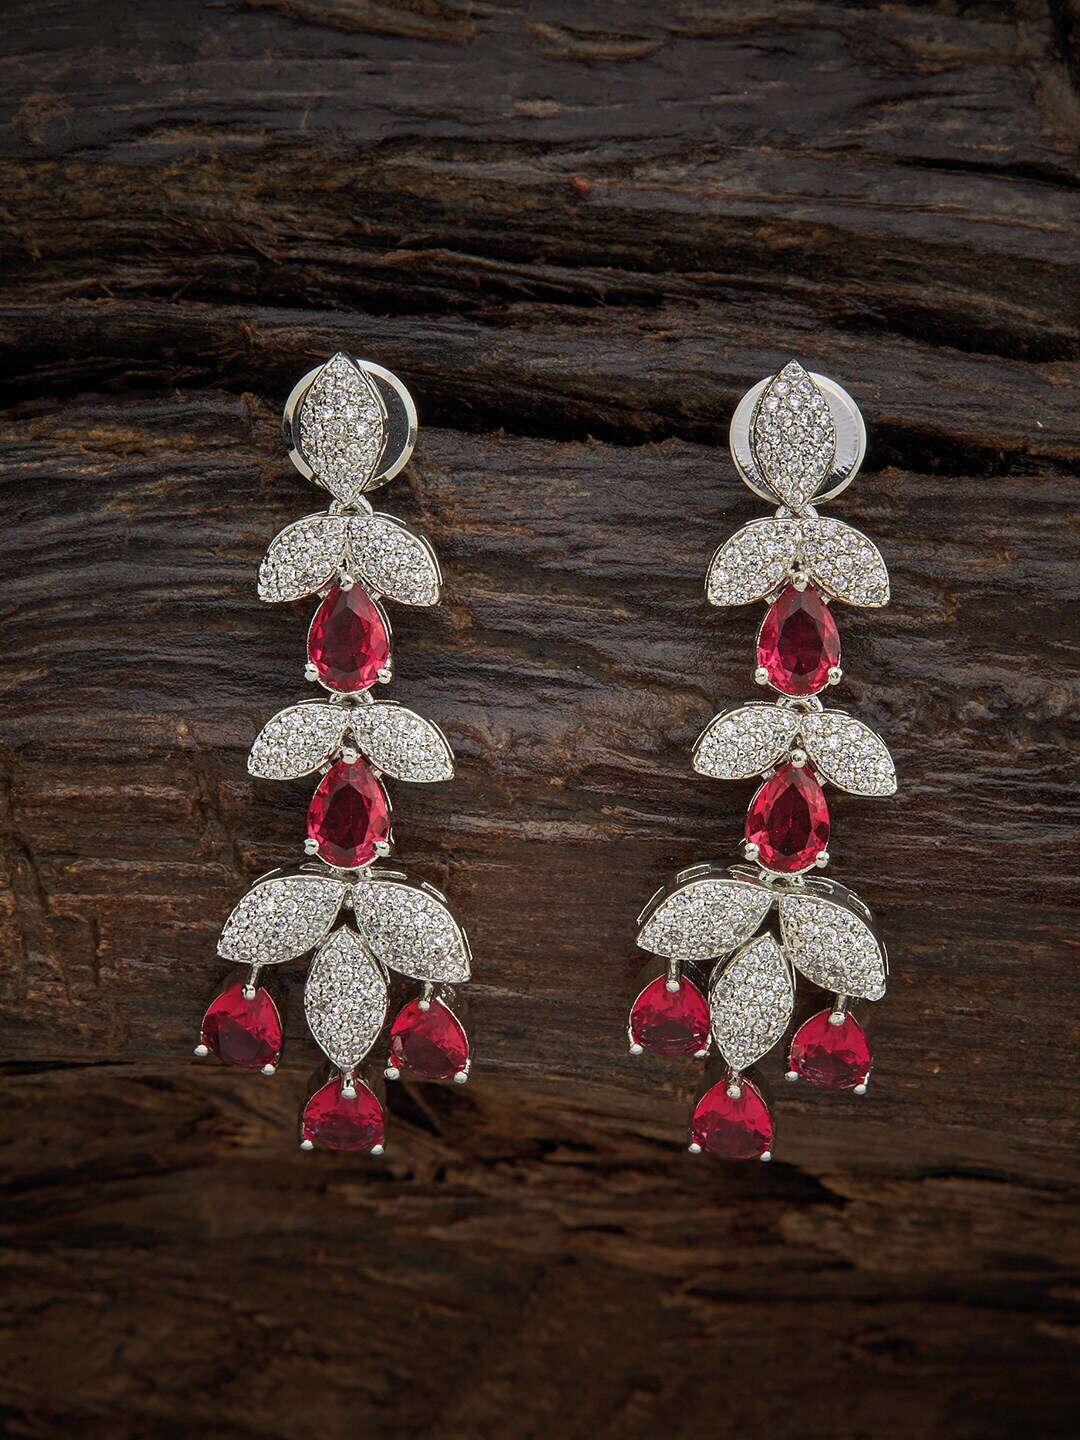 Kushal's Fashion Jewellery Red Leaf Shaped Ear Cuff Earrings Price in India